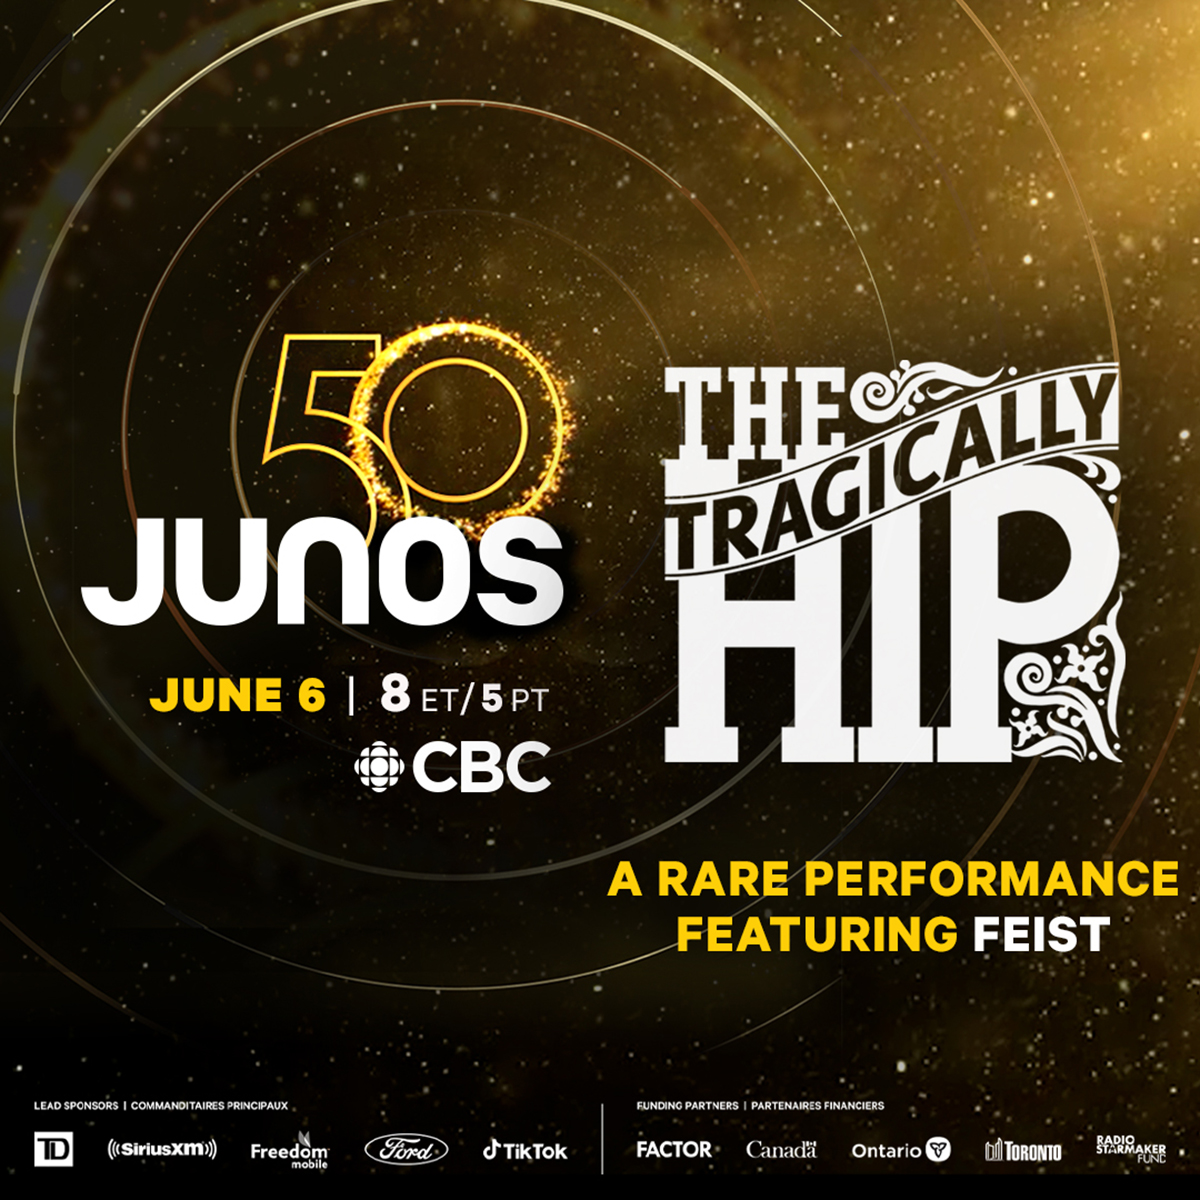 The Tragically Hip set to perform with Feist at The 50th Annual JUNO